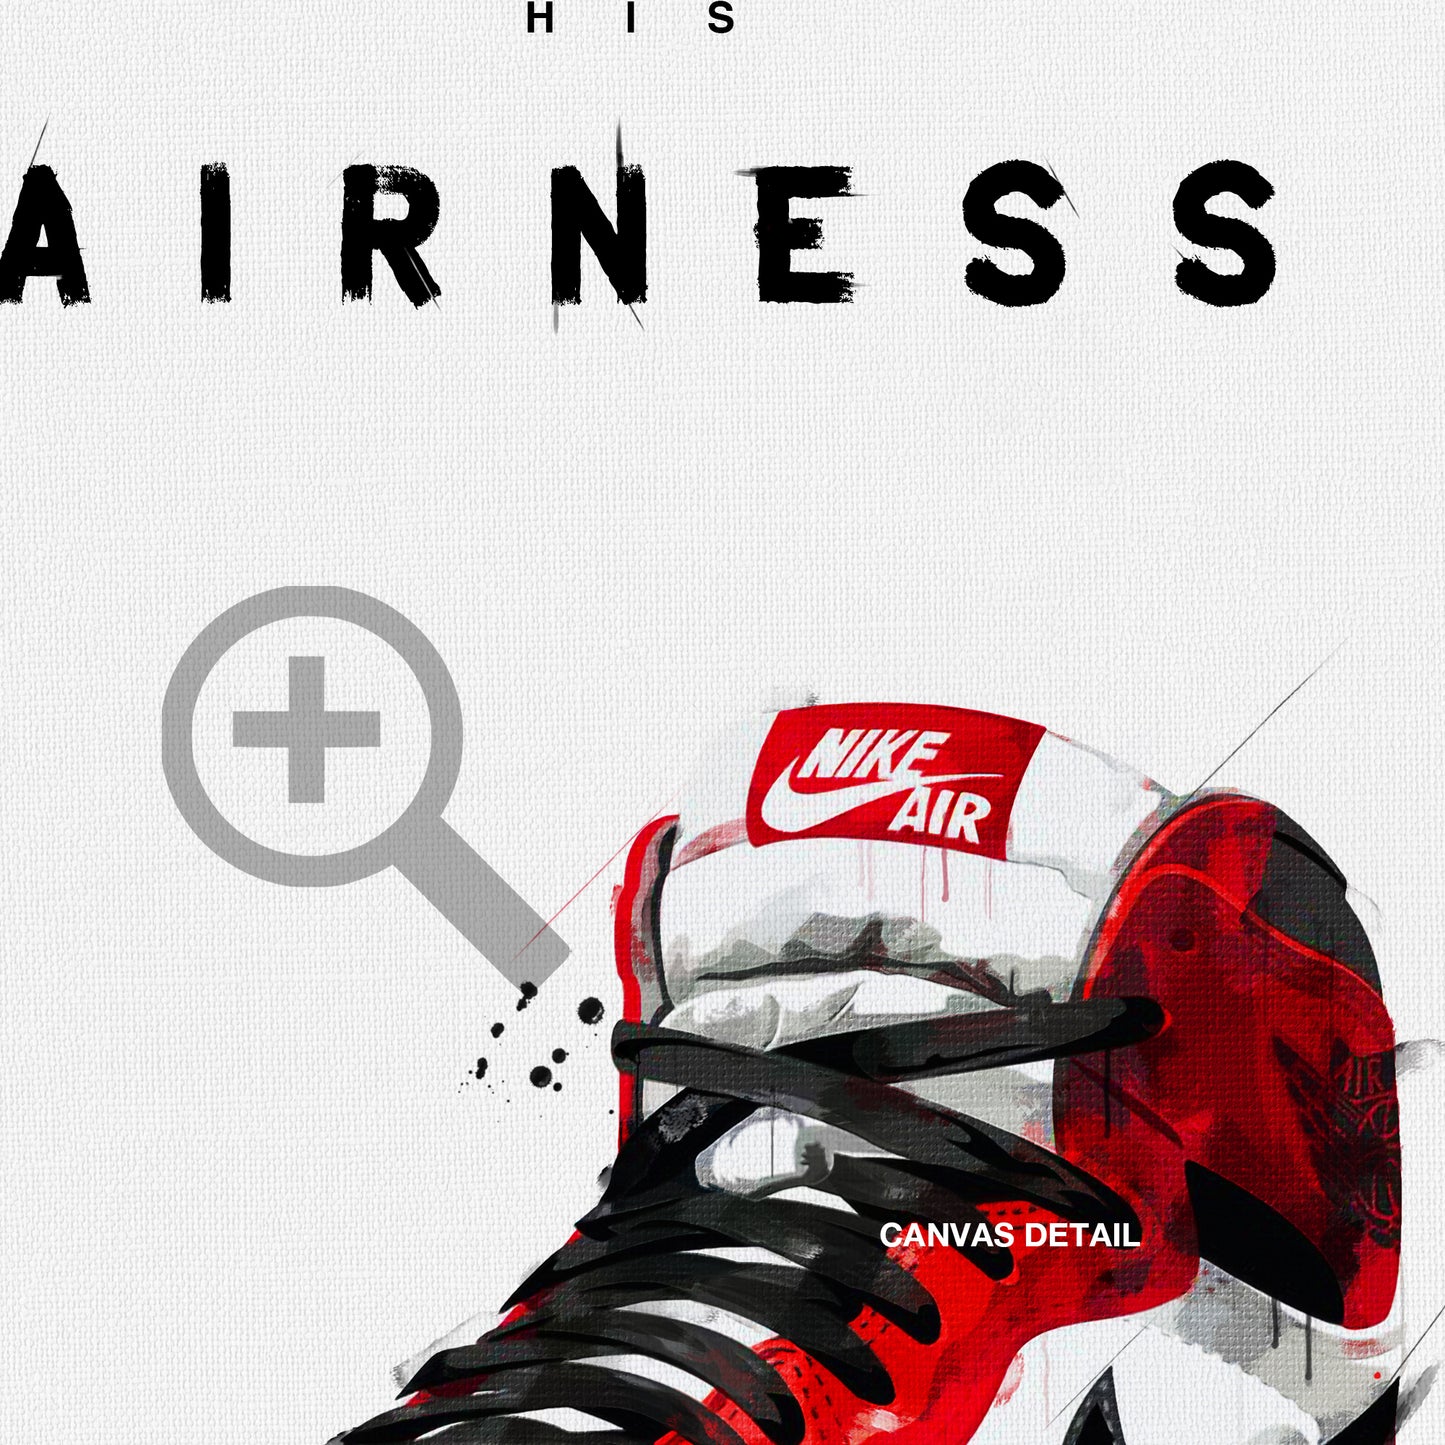 In His Airness